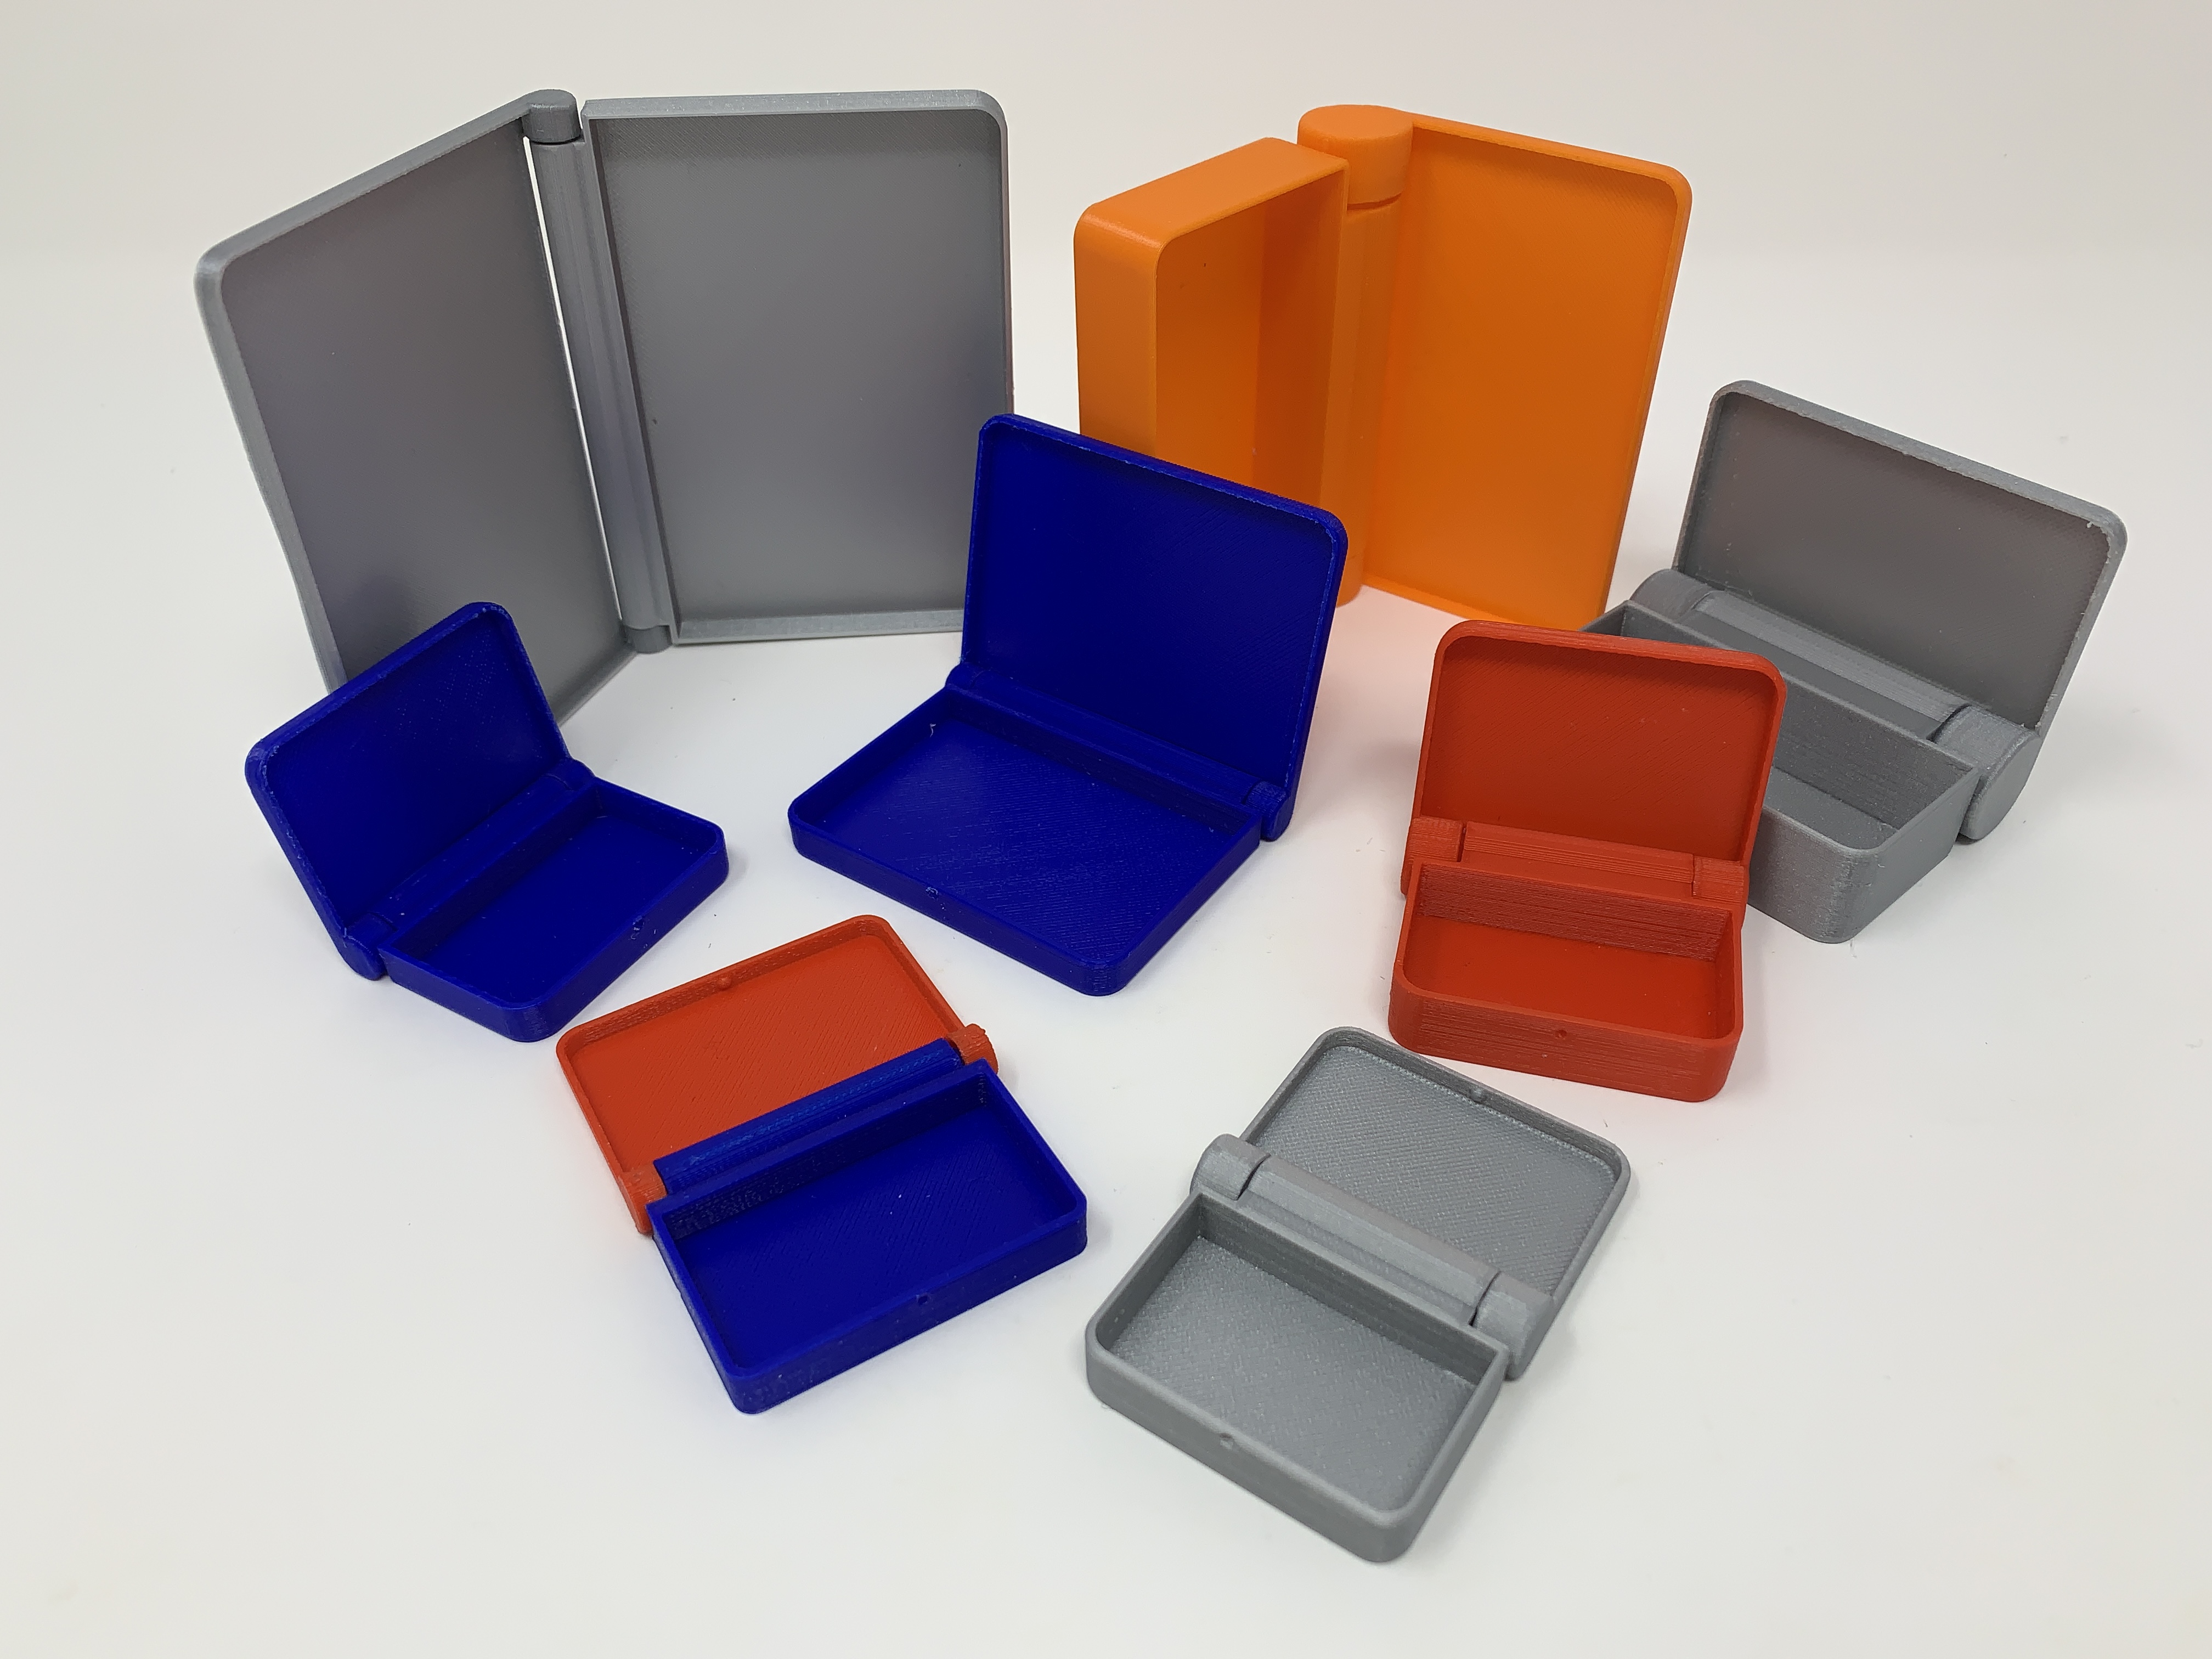 Designing a Parametric "Print in Place" Hinged Container Using Autodesk Fusion 360